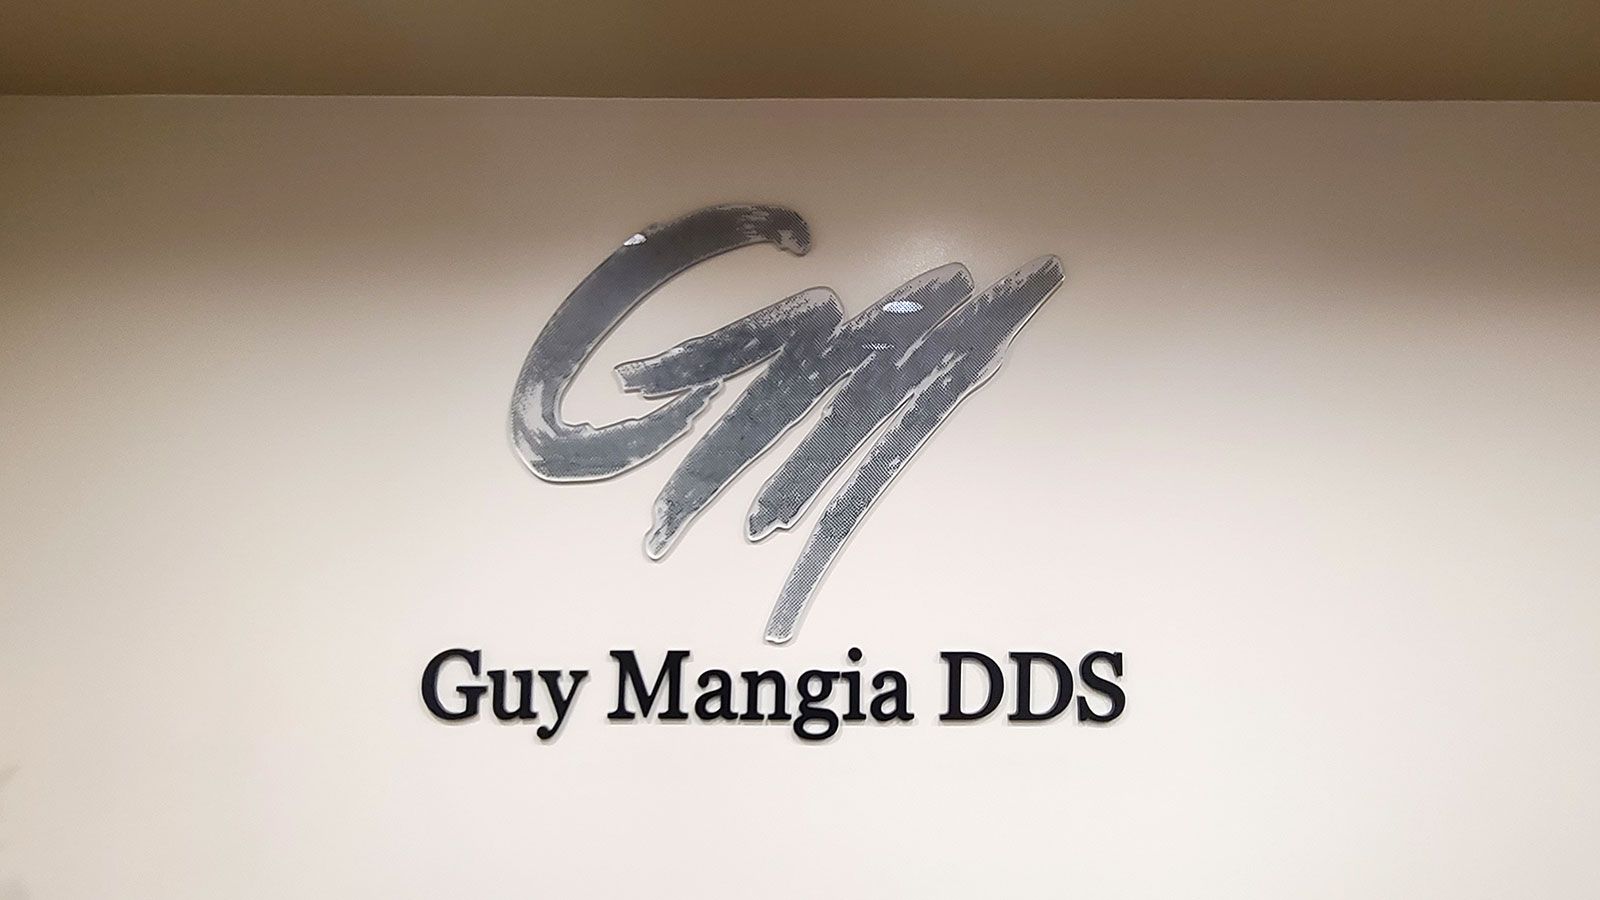 Guy Mangia DDS 3D sign